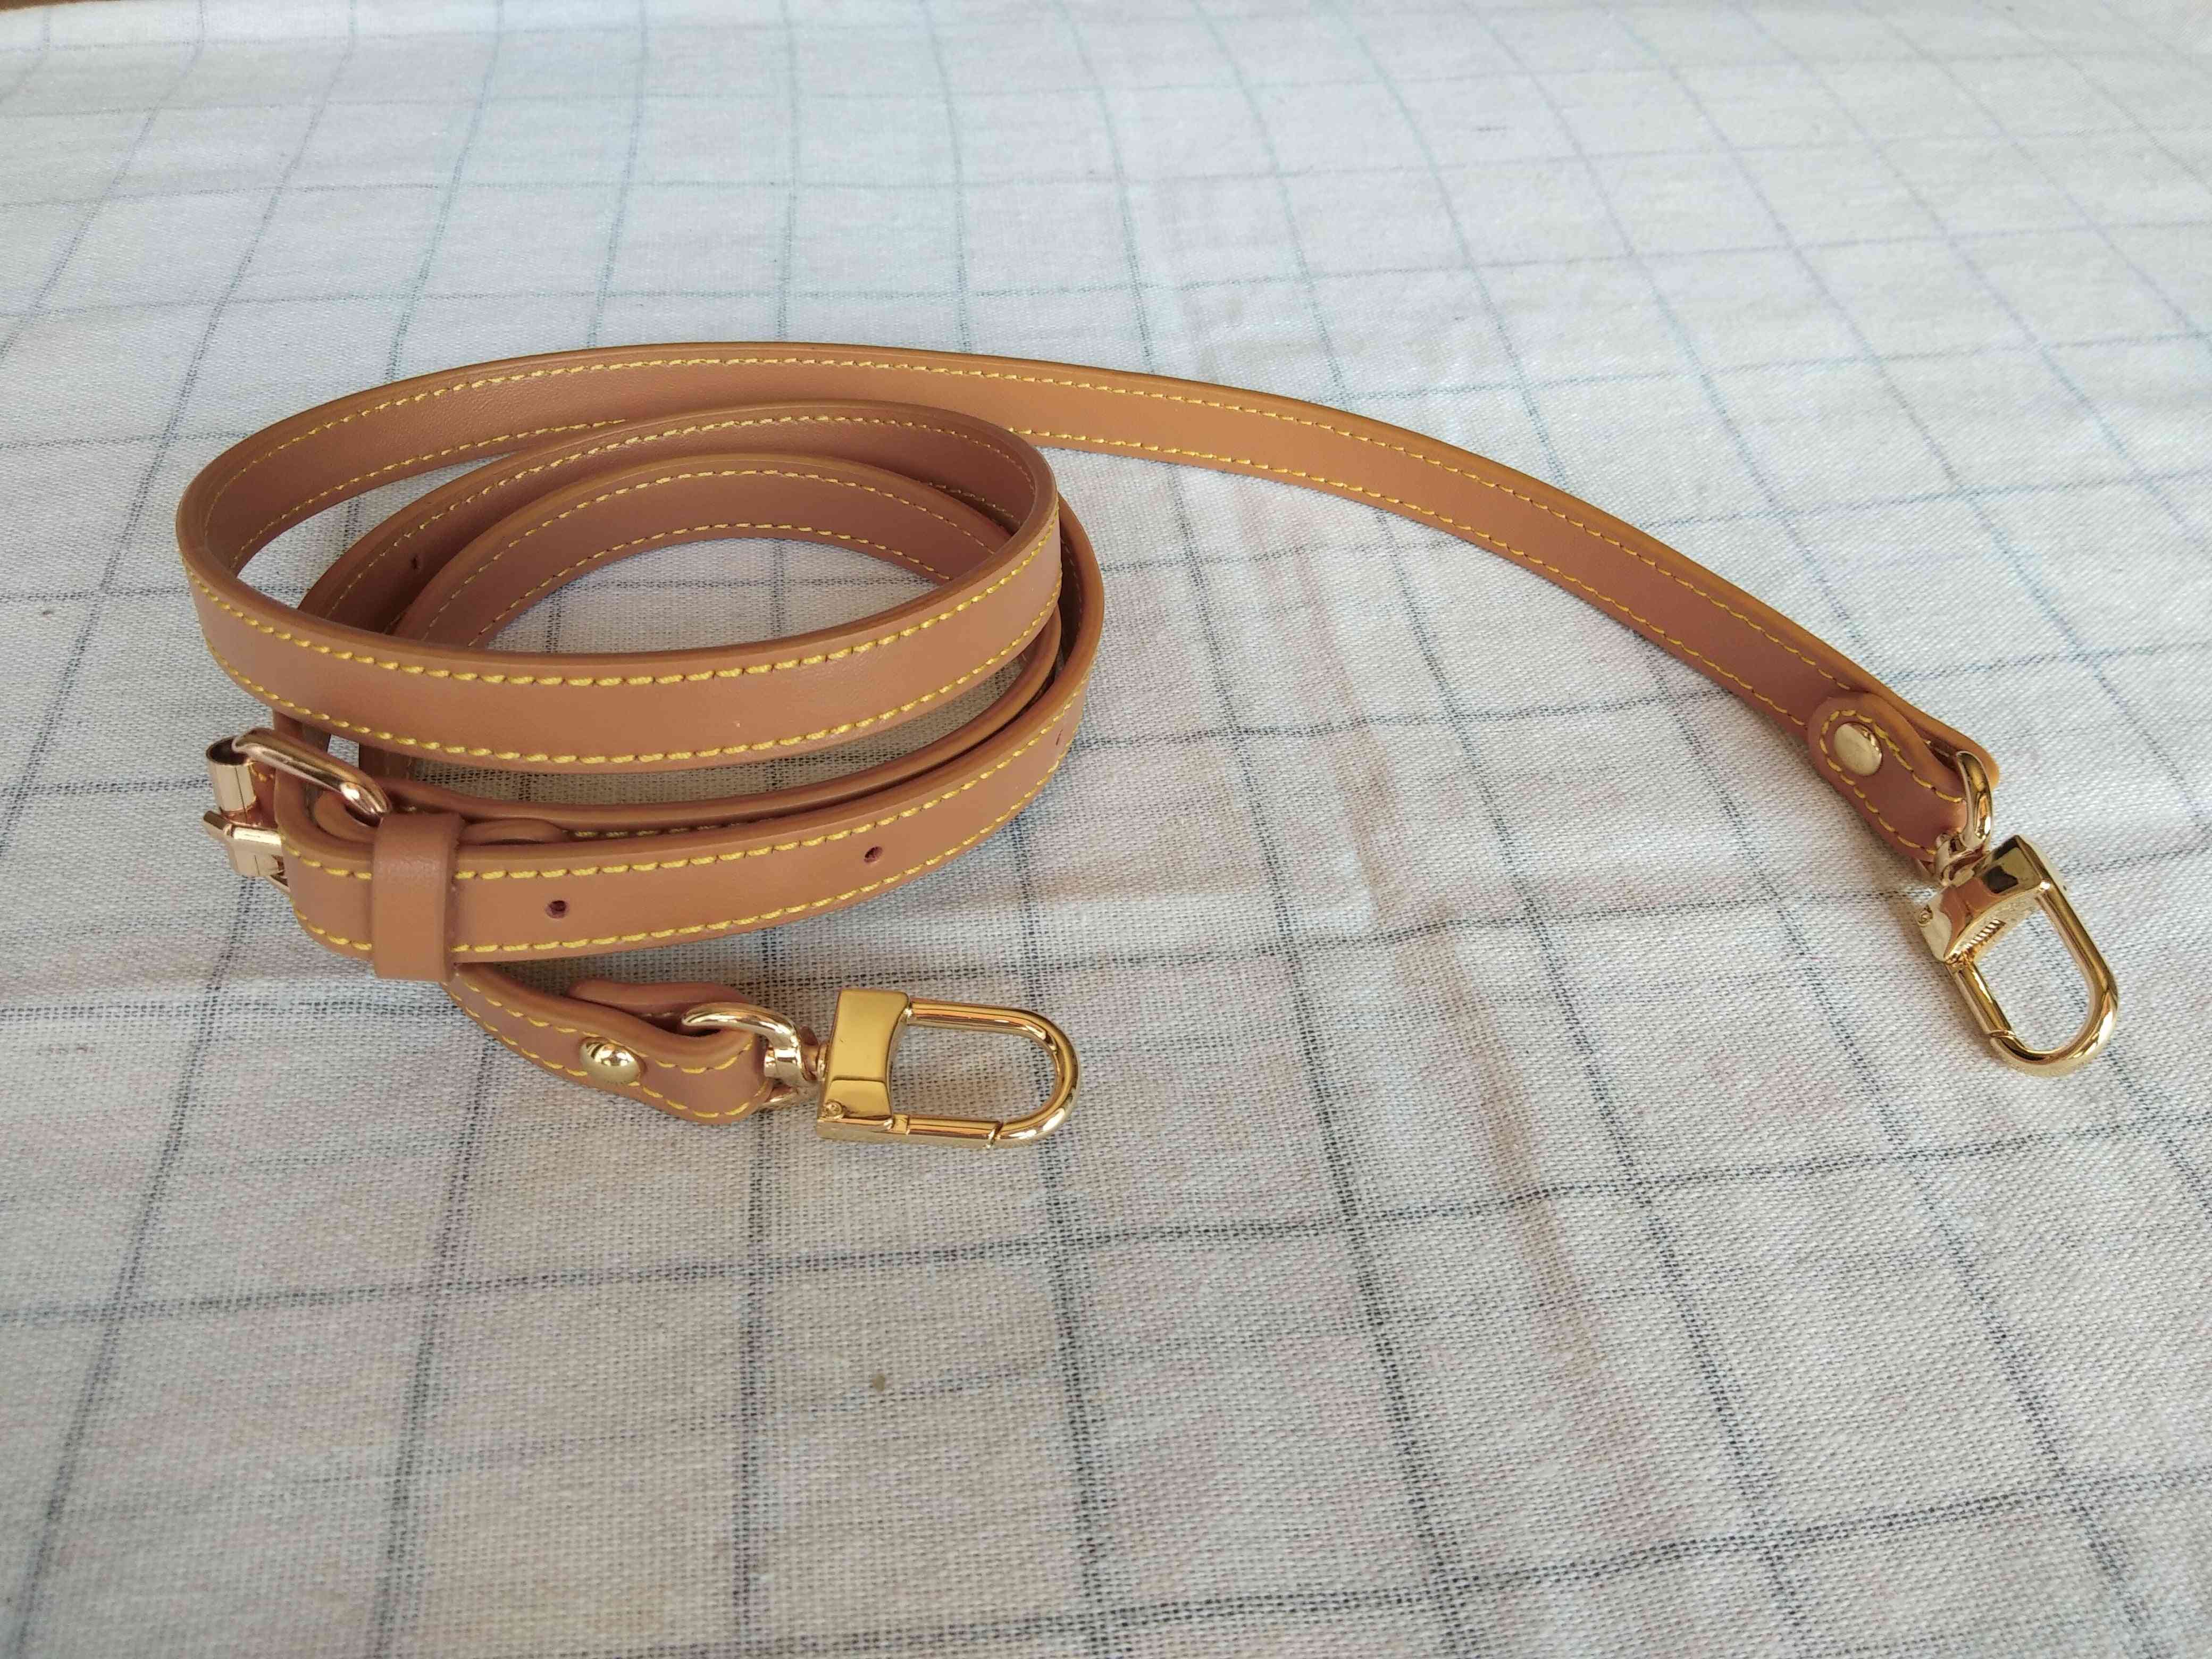 Adjustable- Real Leather, Crossbody Strap, Bag Accessories